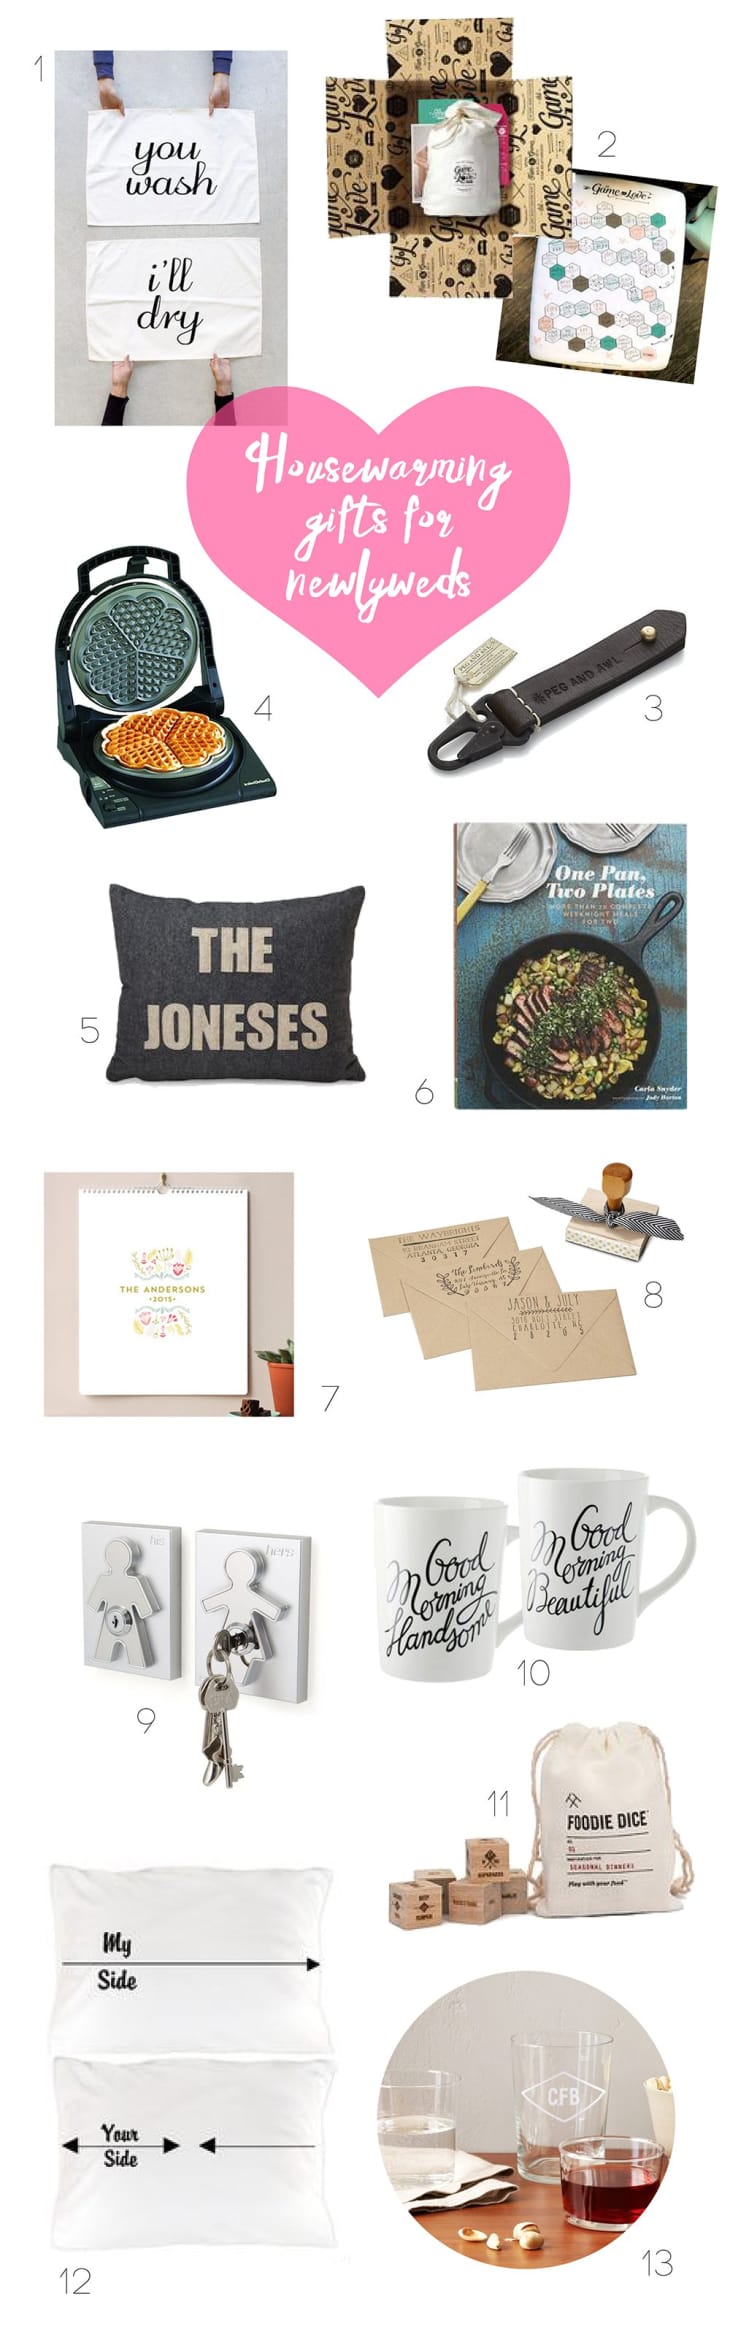 13 Housewarming Gifts for Newlyweds